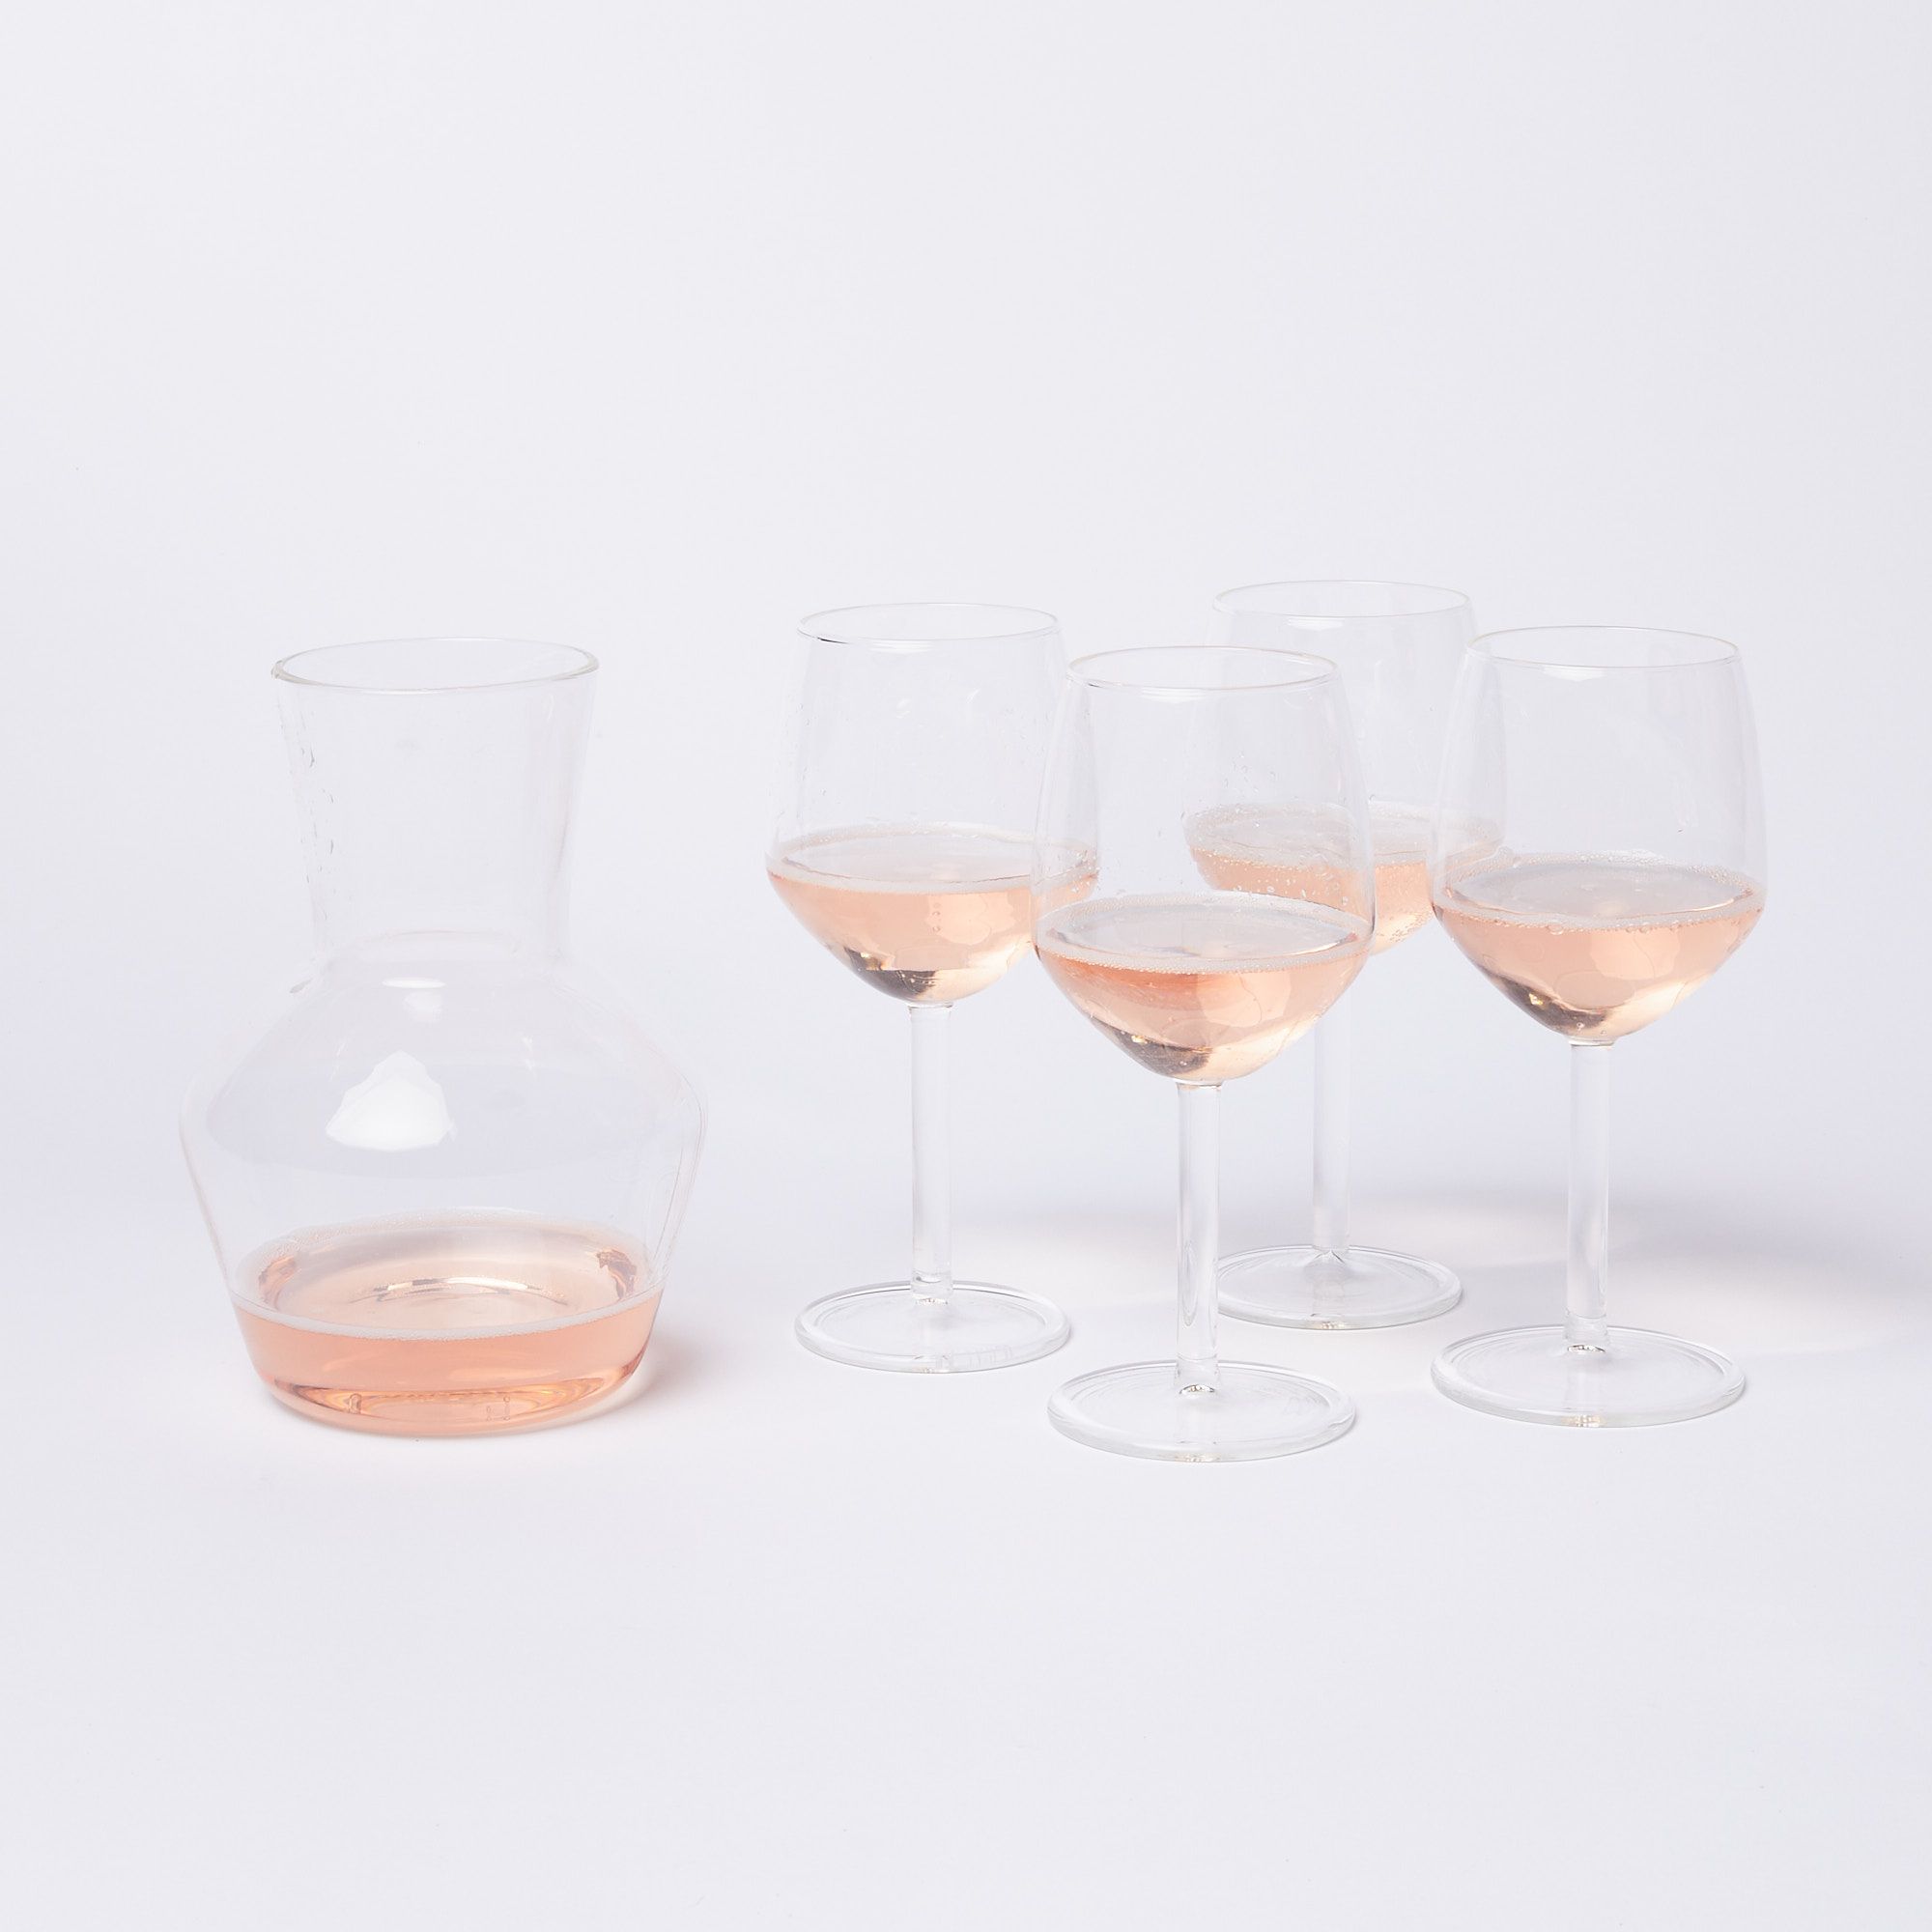 4 wine glasses and a carafe with rose